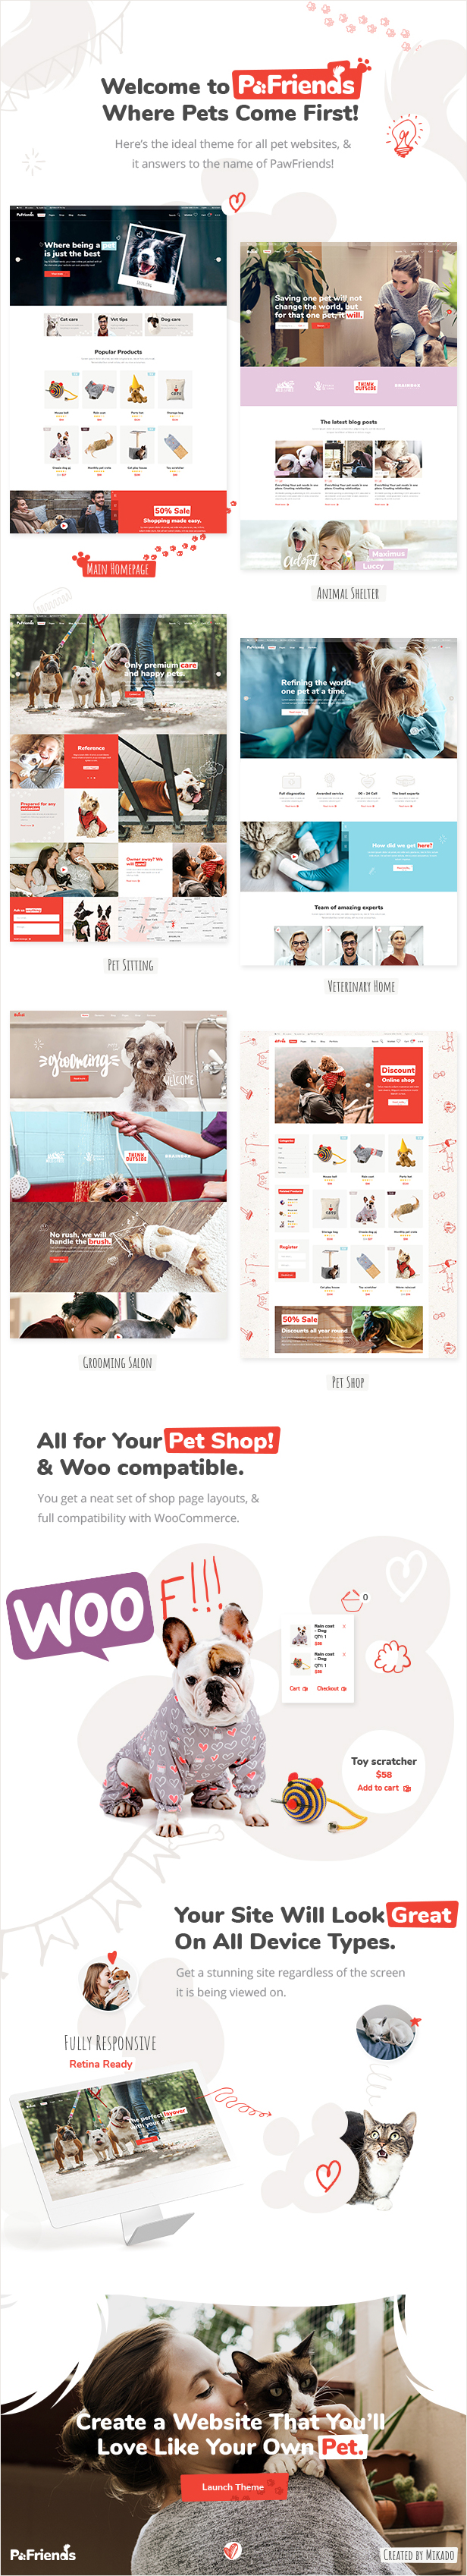 PawFriends - Pet Shop and Veterinary Theme - 1